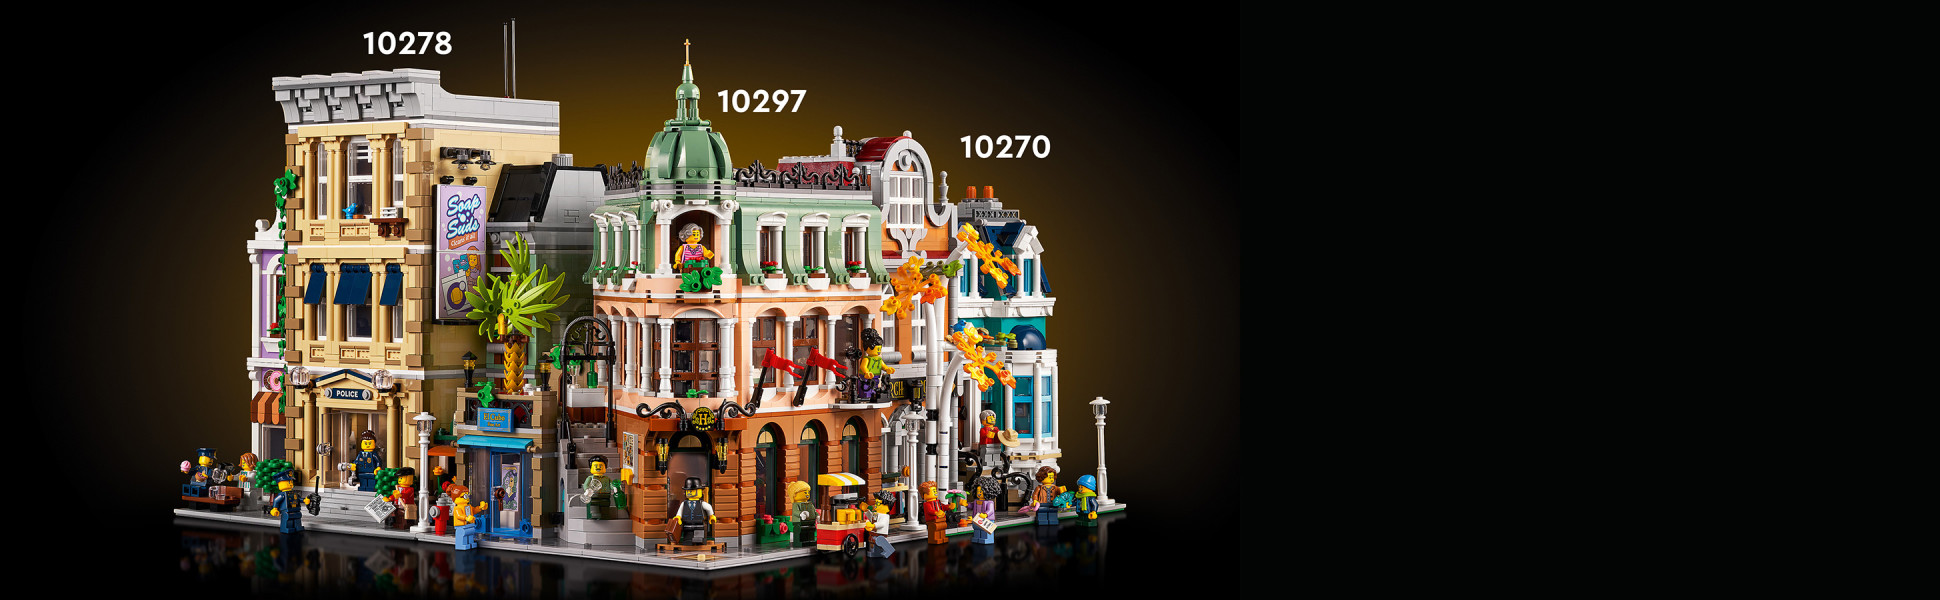 LEGO Icons Boutique Hotel 10297 Modular Building Display Model Kit